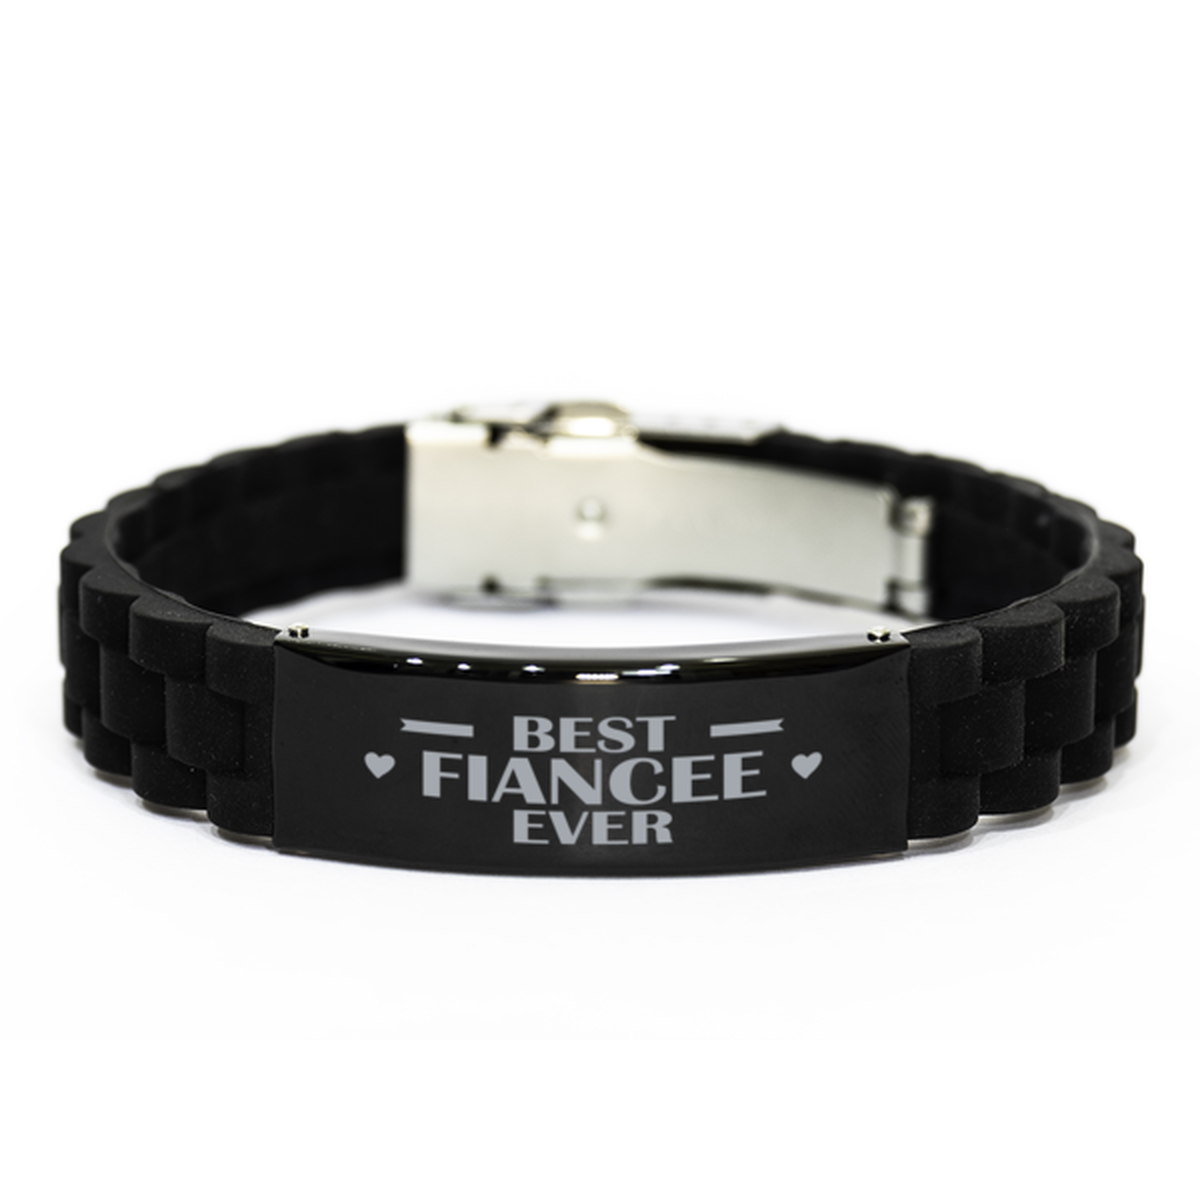 Best Fiancee Ever Fiancee Gifts, Funny Black Engraved Bracelet For Fiancee, Family Gifts For Women